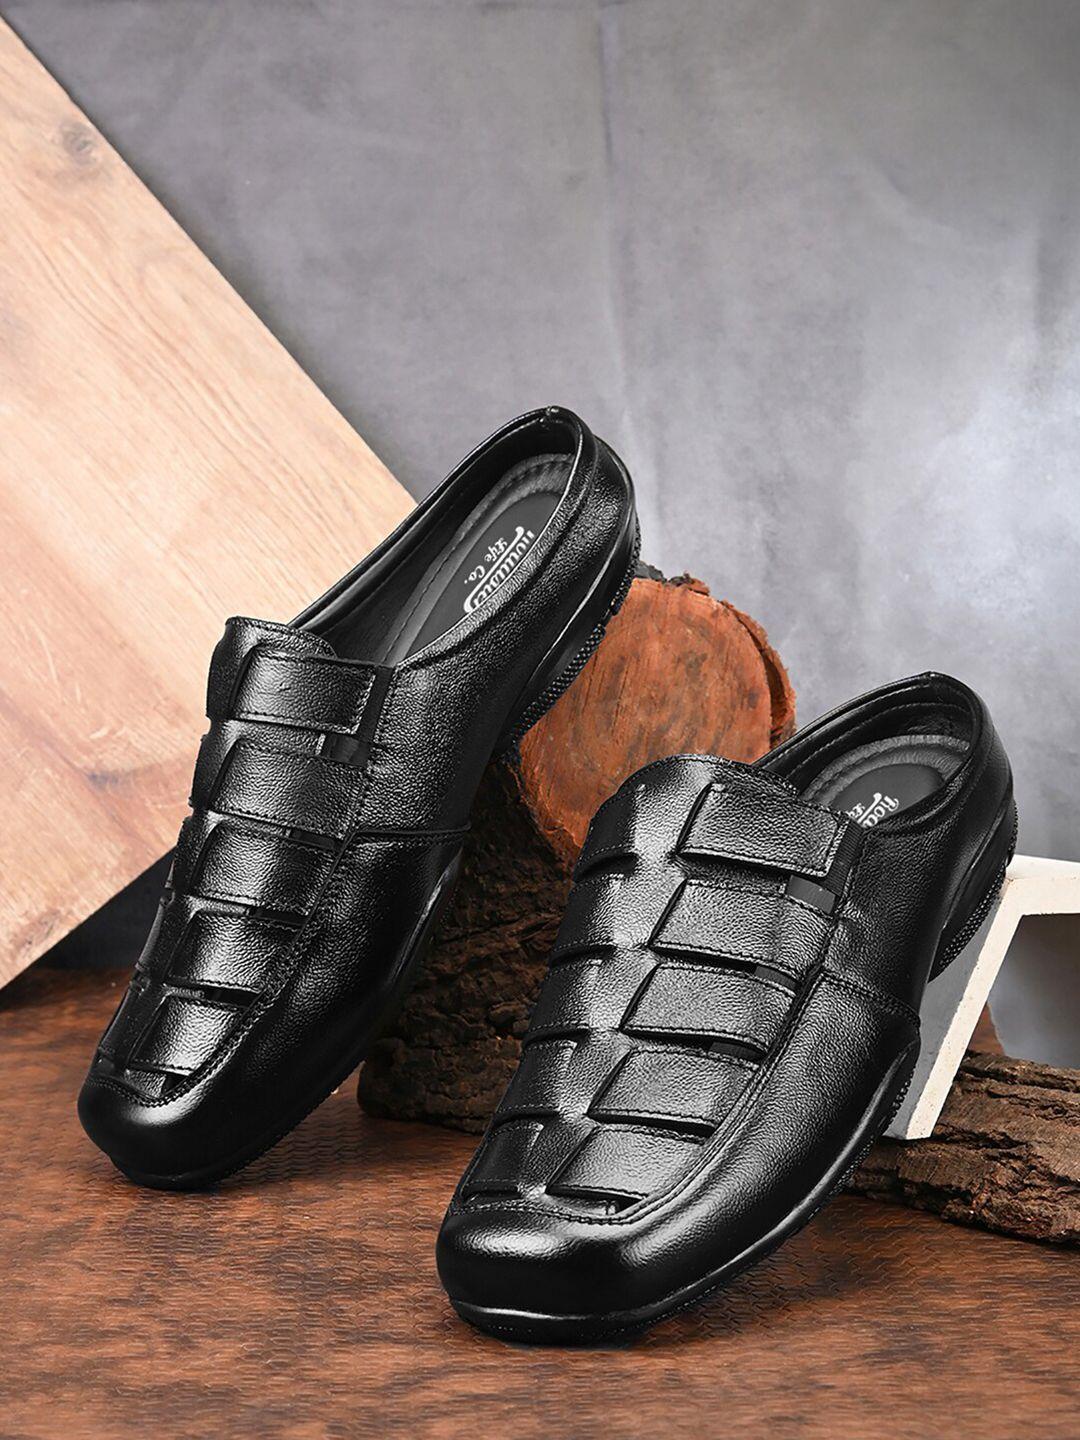 the roadster lifestyle co. men black leather shoe-style sandals